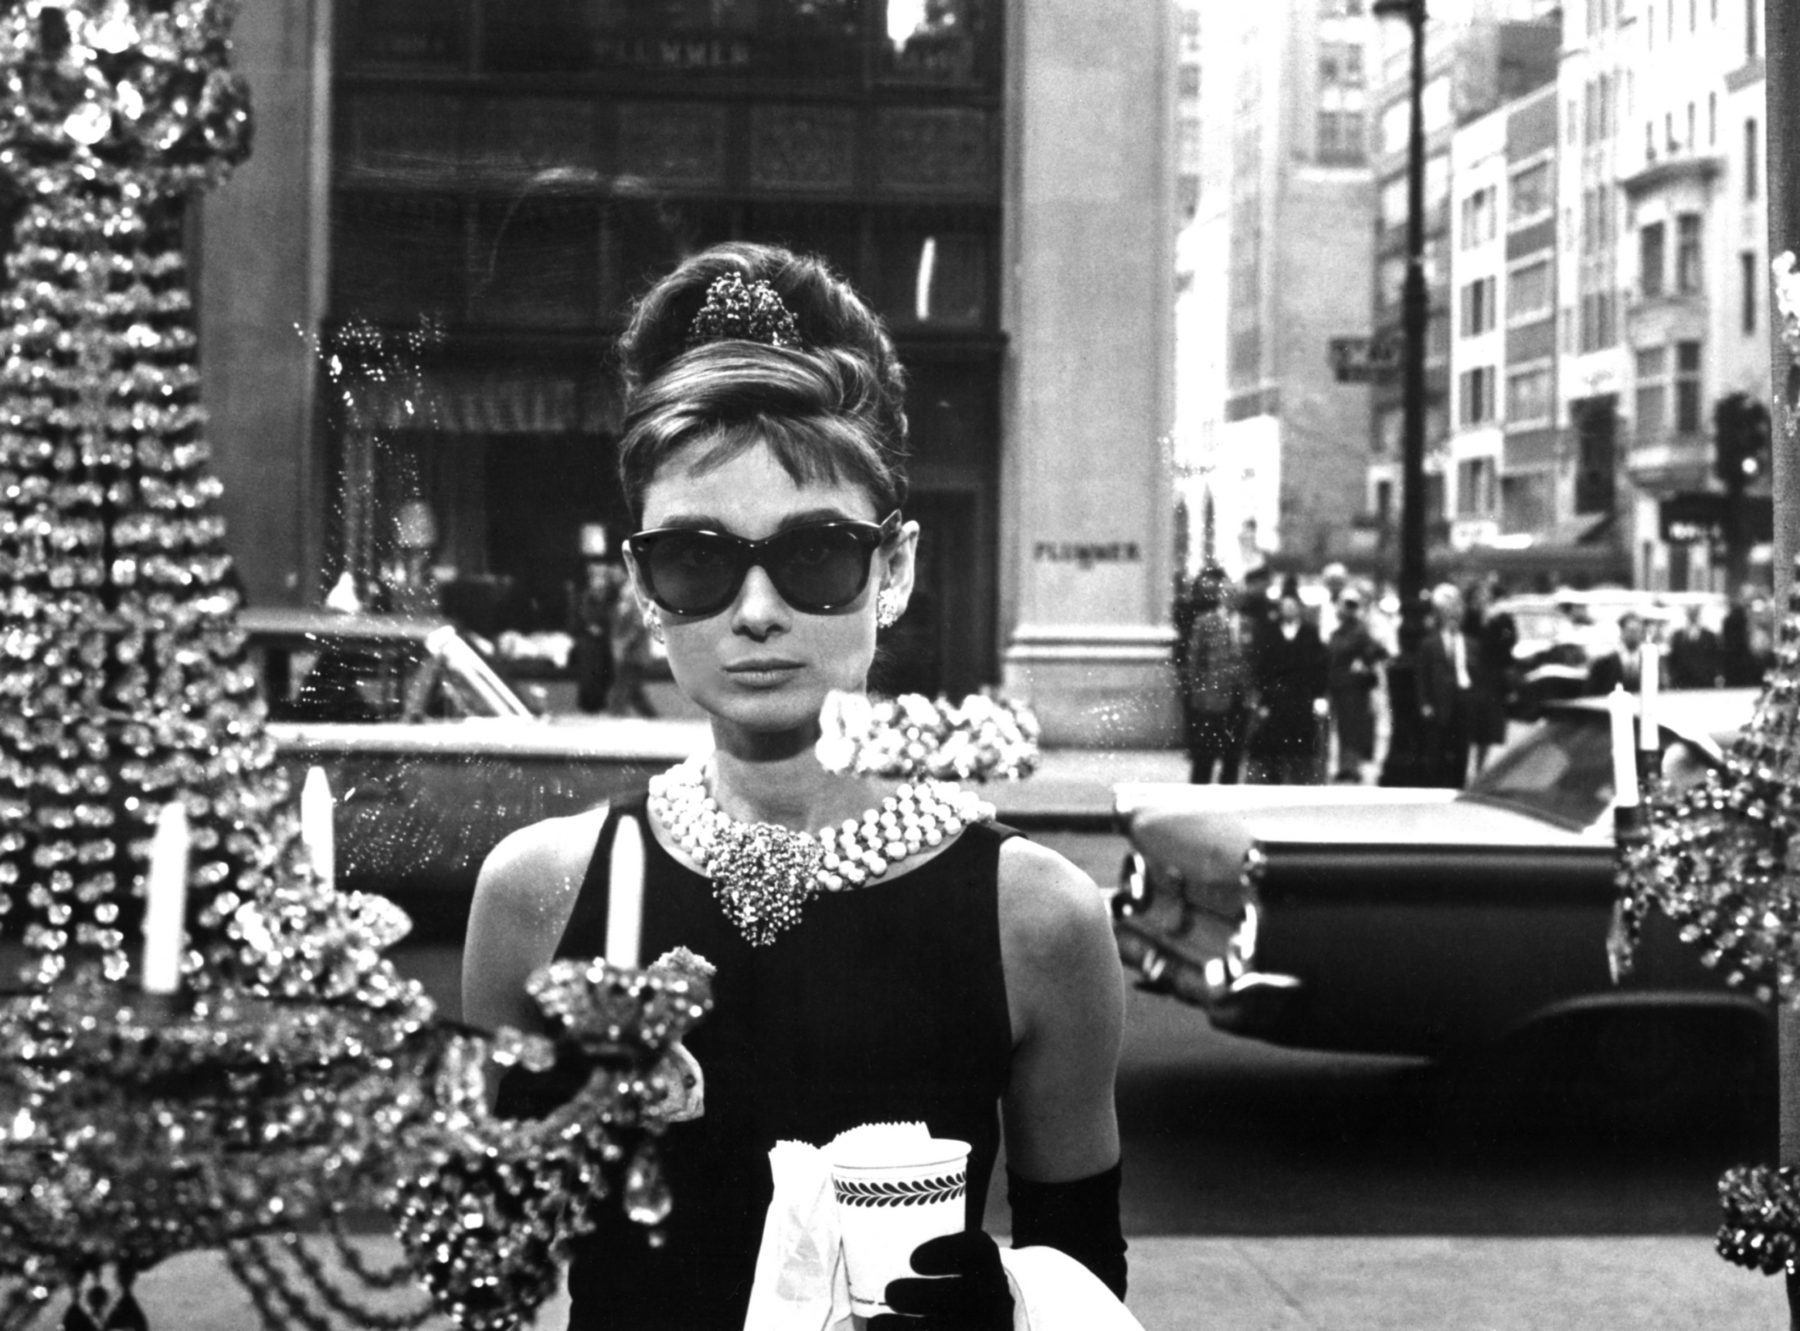 The Story Behind That Little Black Dress Worn by Audrey Hepburn In 